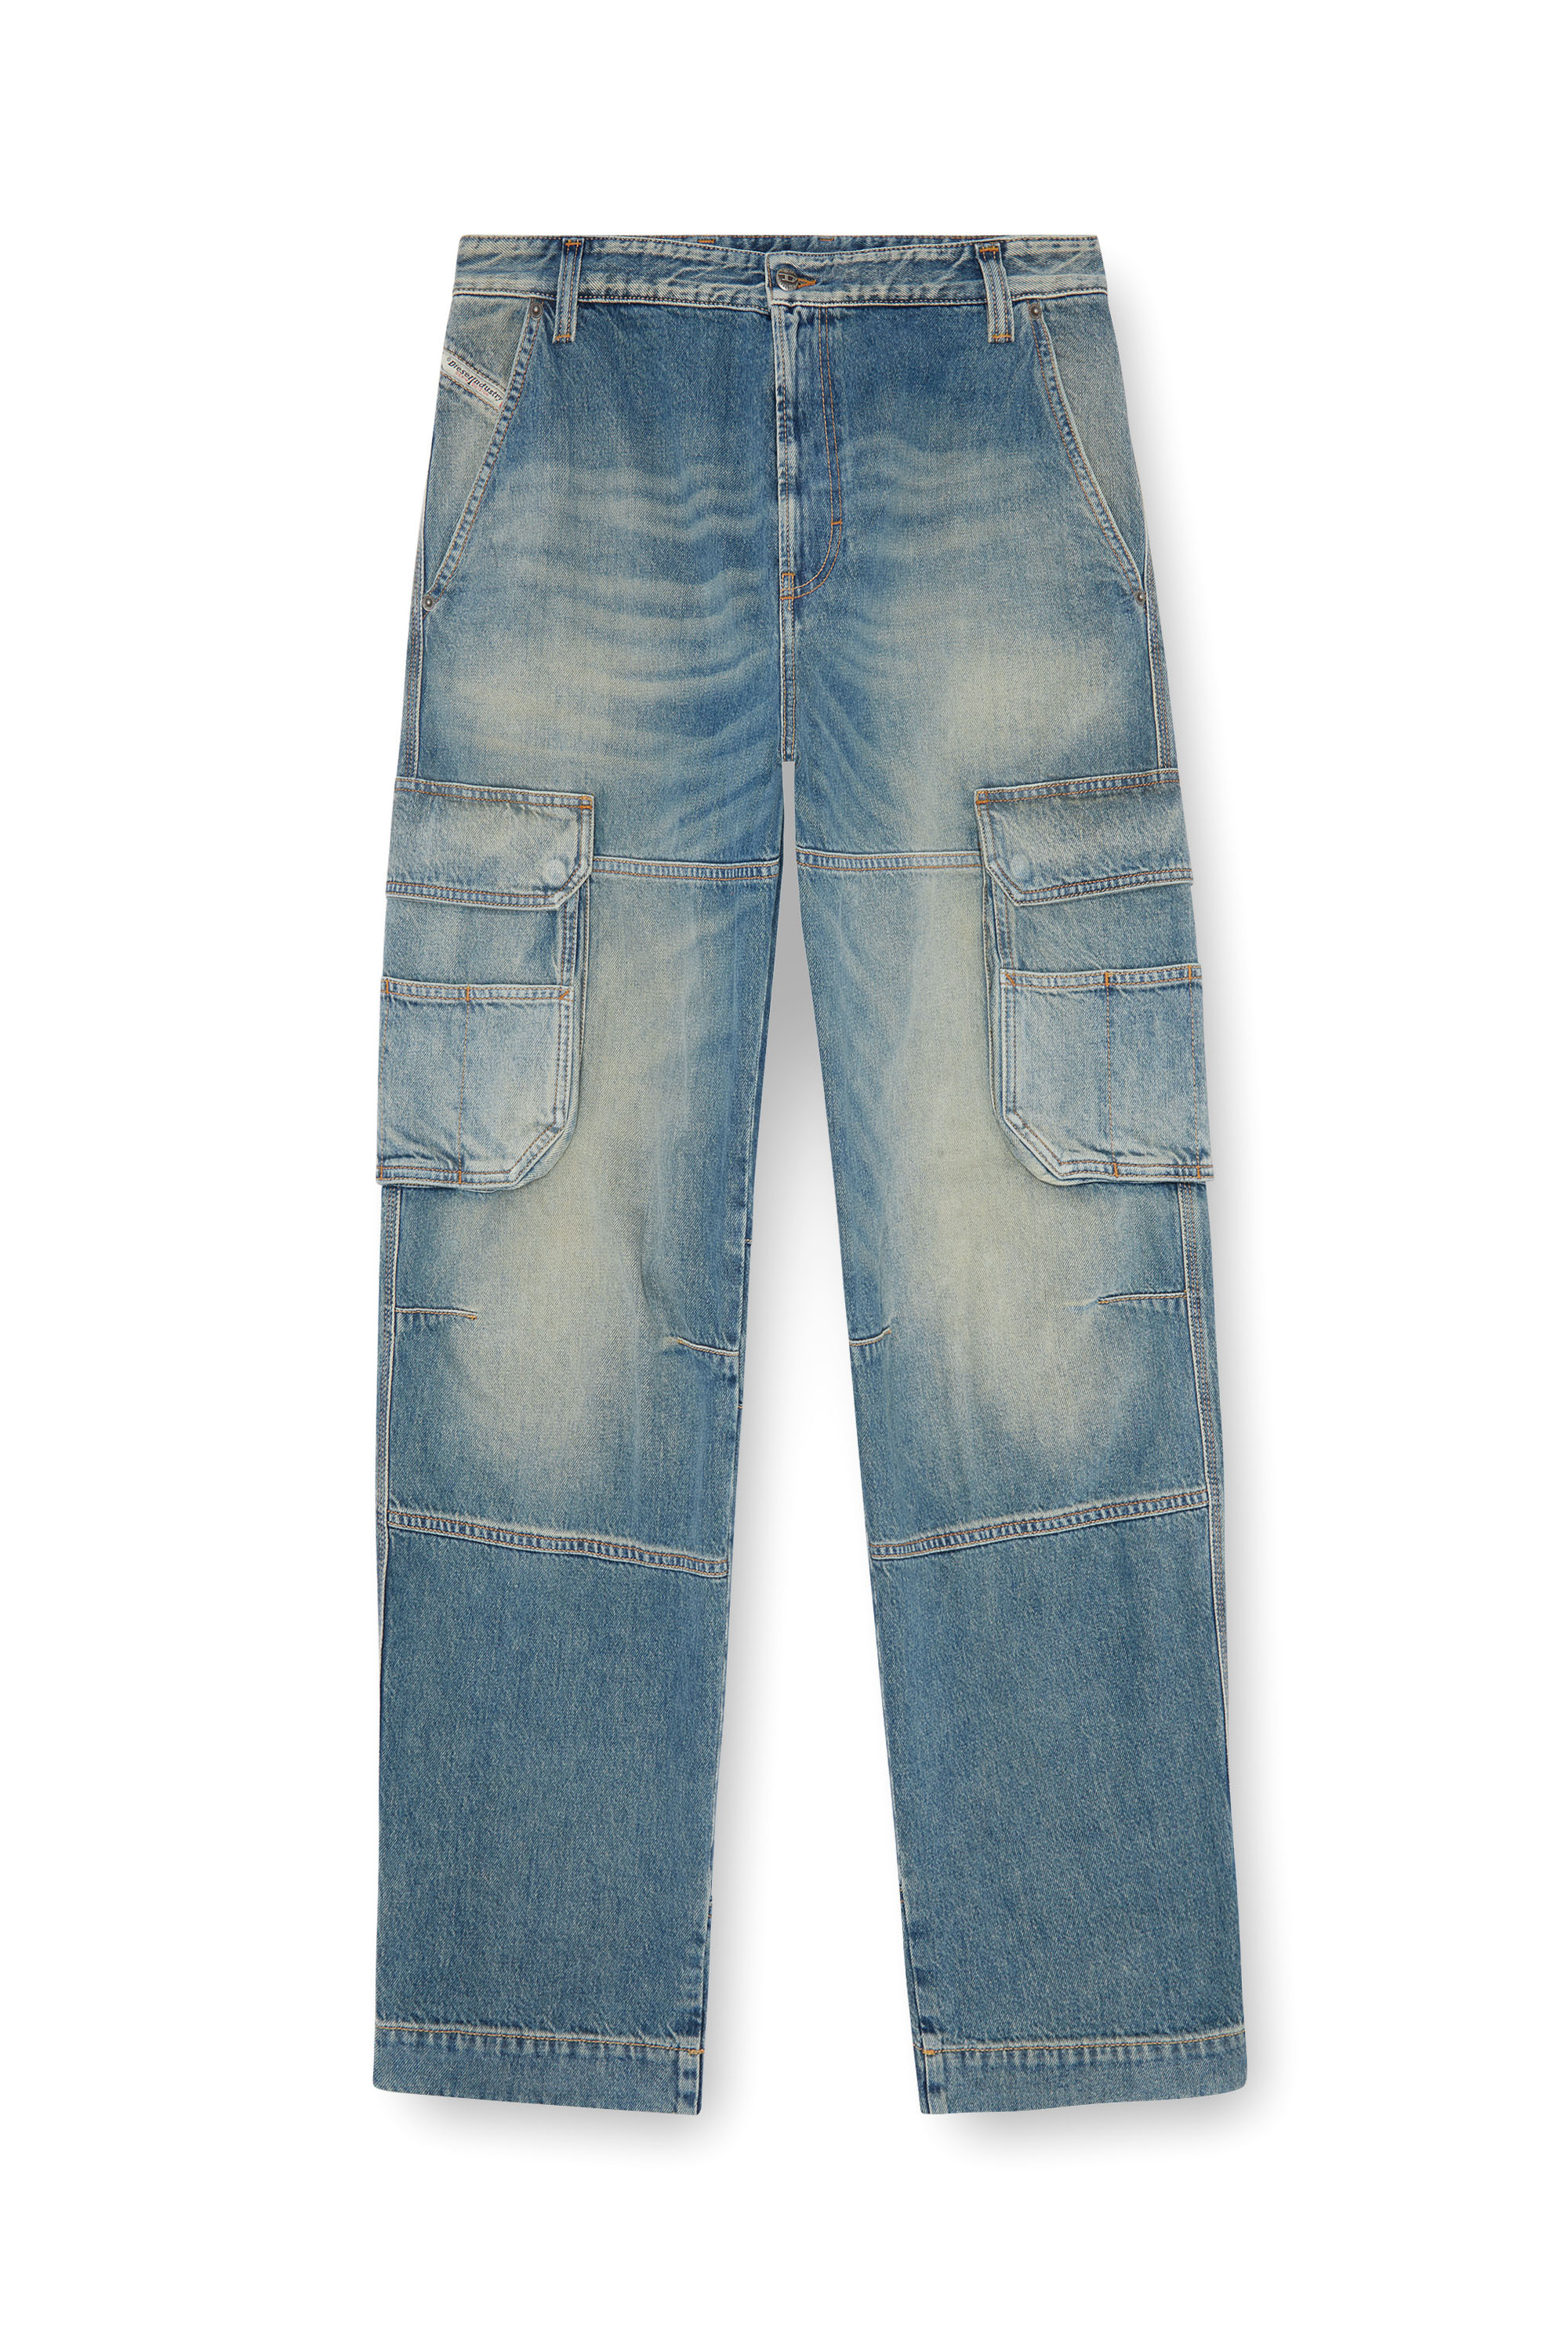 Diesel - Straight Jeans D-Fish 09J83, Hombre Straight Jeans - D-Fish in Azul marino - Image 5